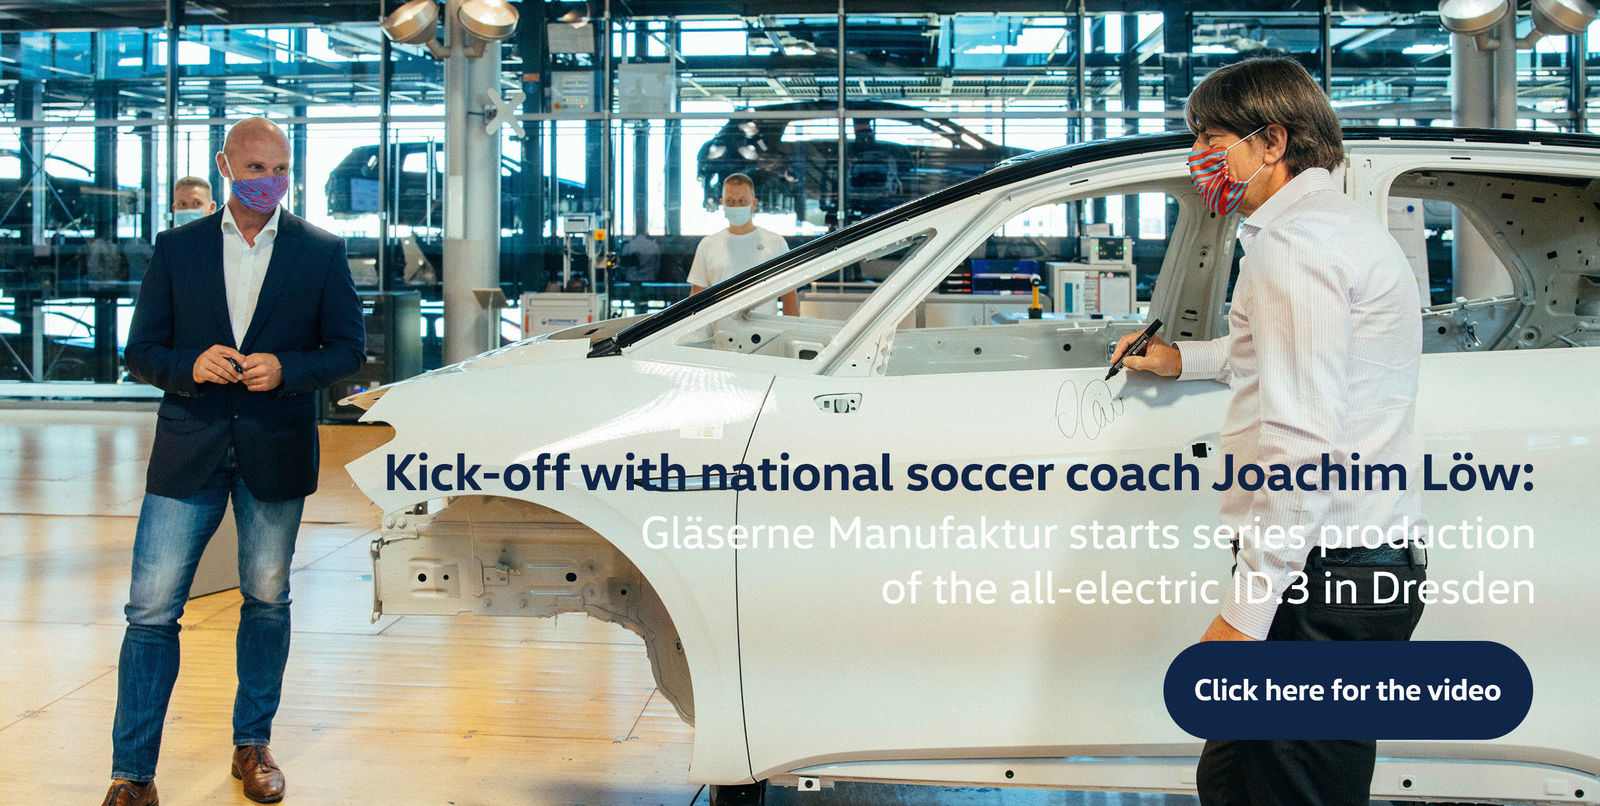 Kick-off with national soccer coach Joachim Löw: Gläserne Manufaktur starts series production of the all-electric ID.3 in Dresden